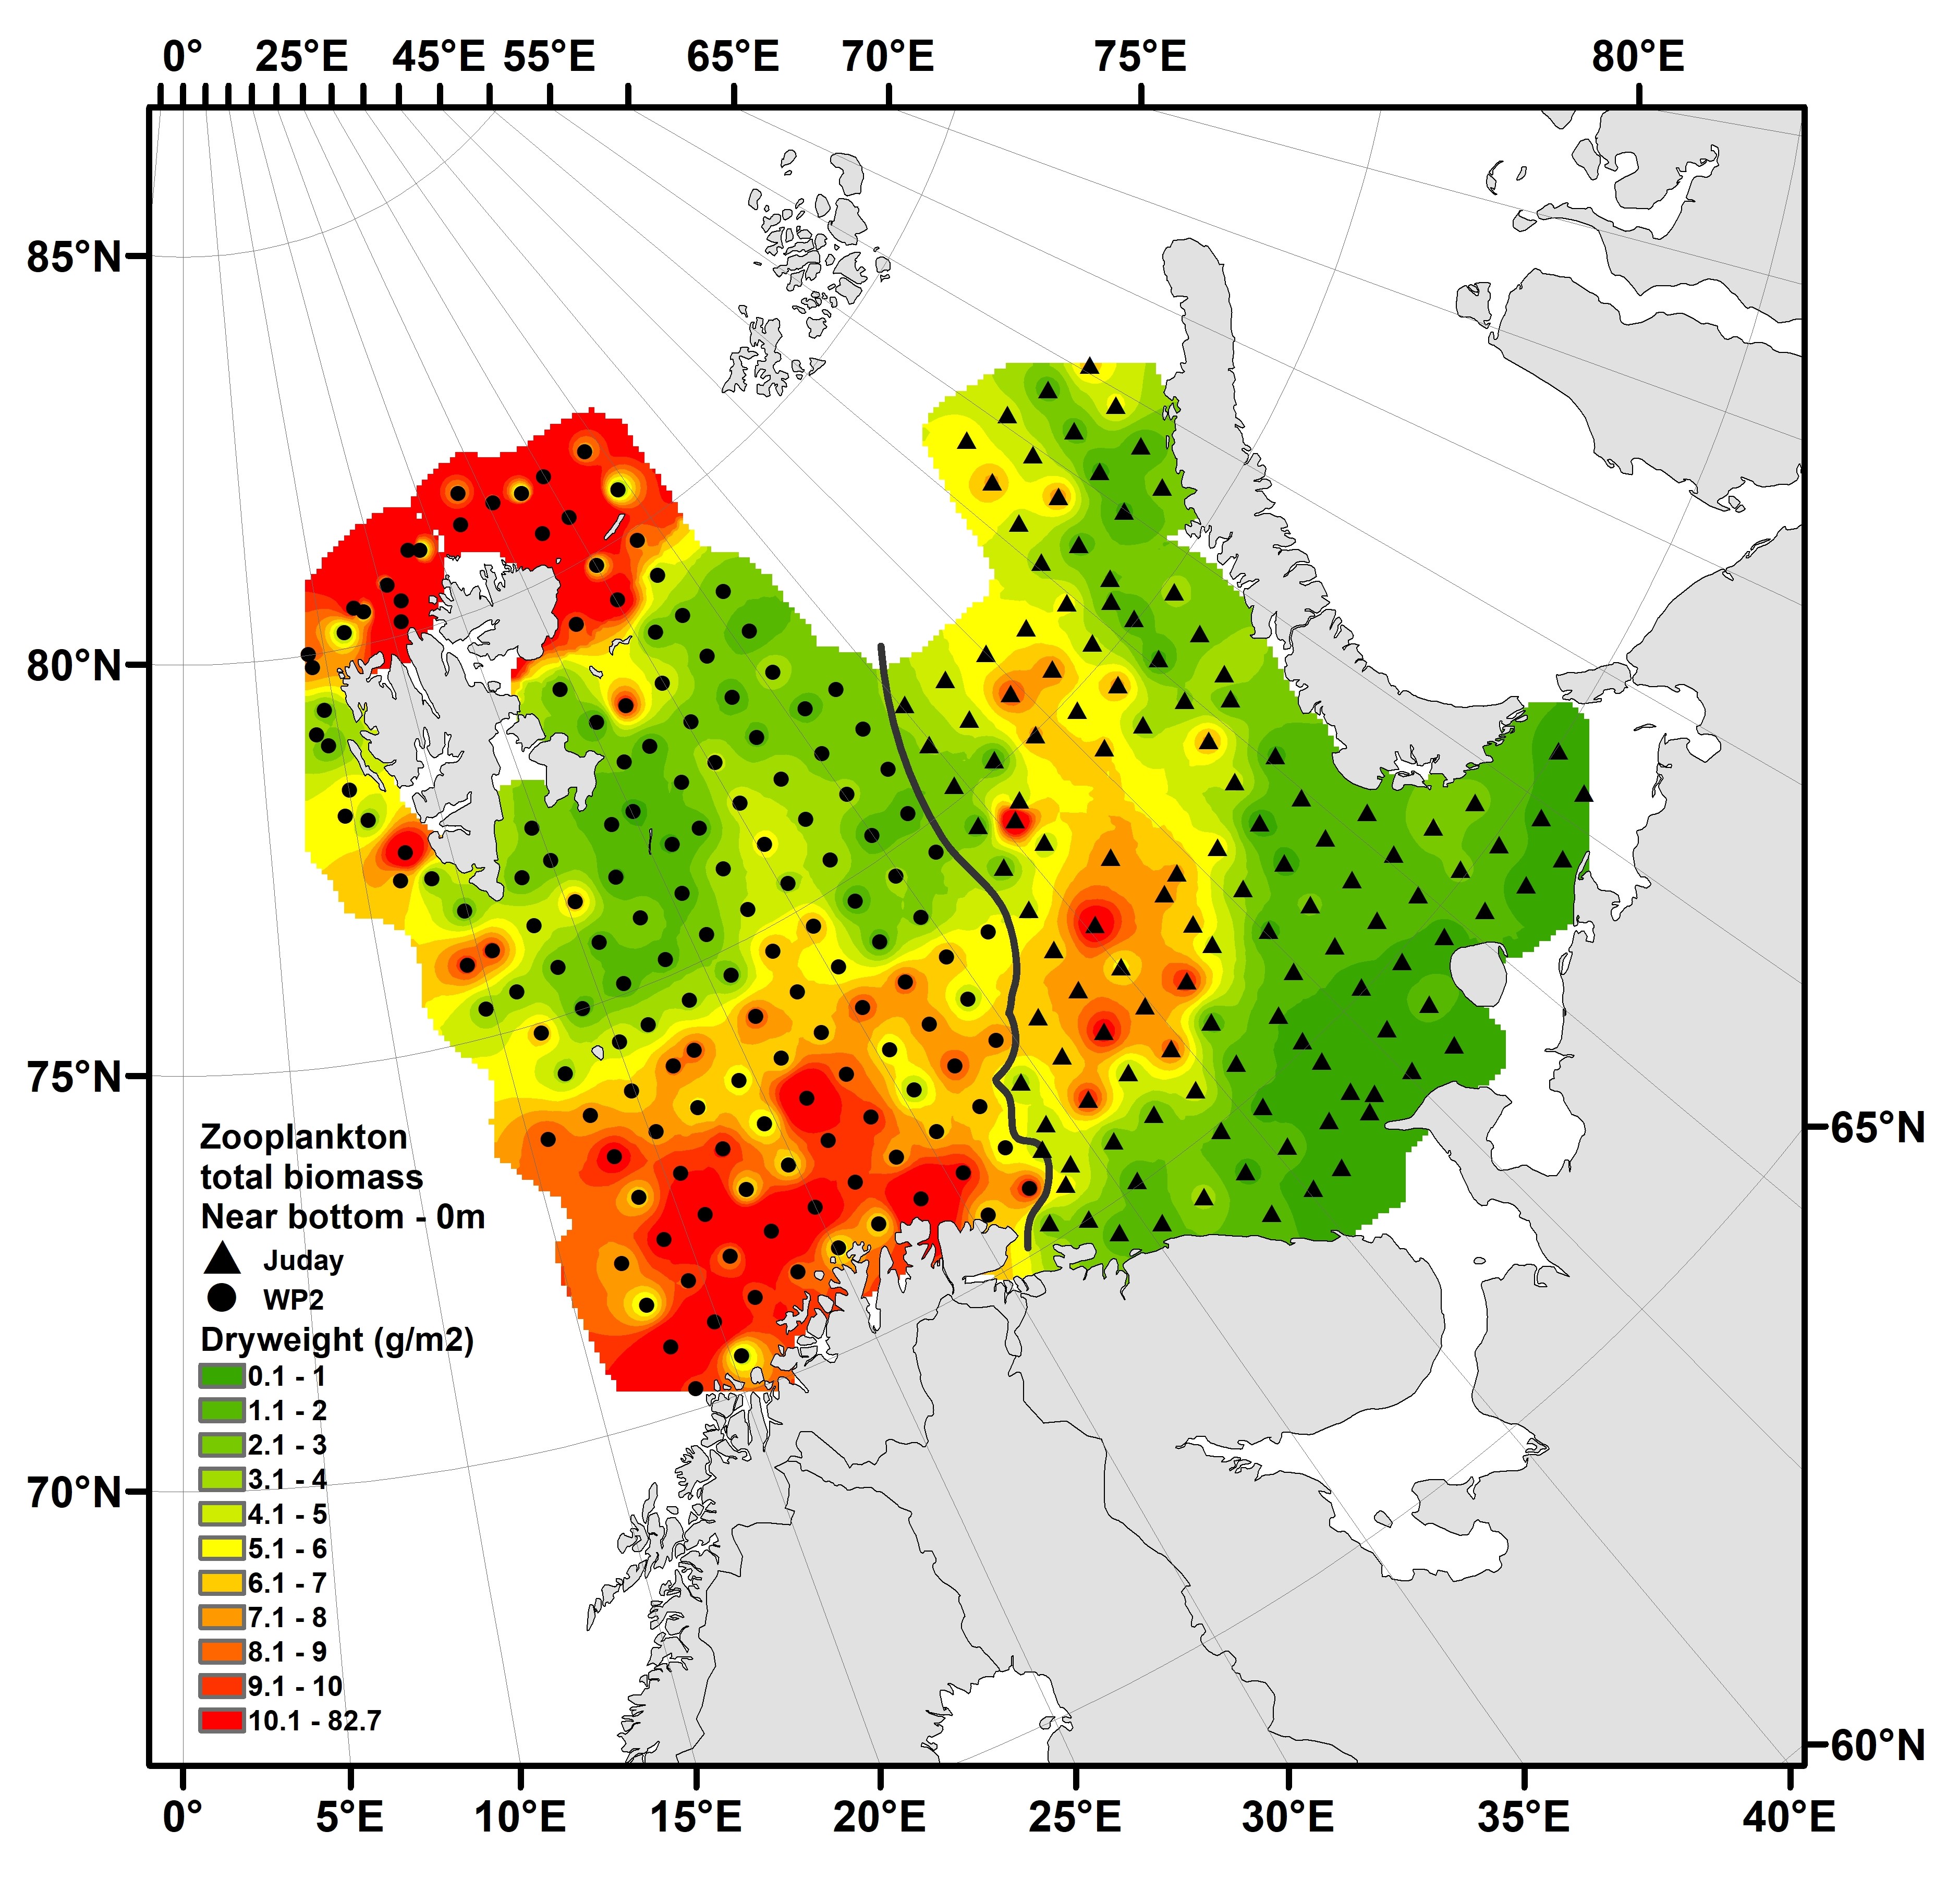 Distribution of total zooplankton biomass from near-bottom 2022